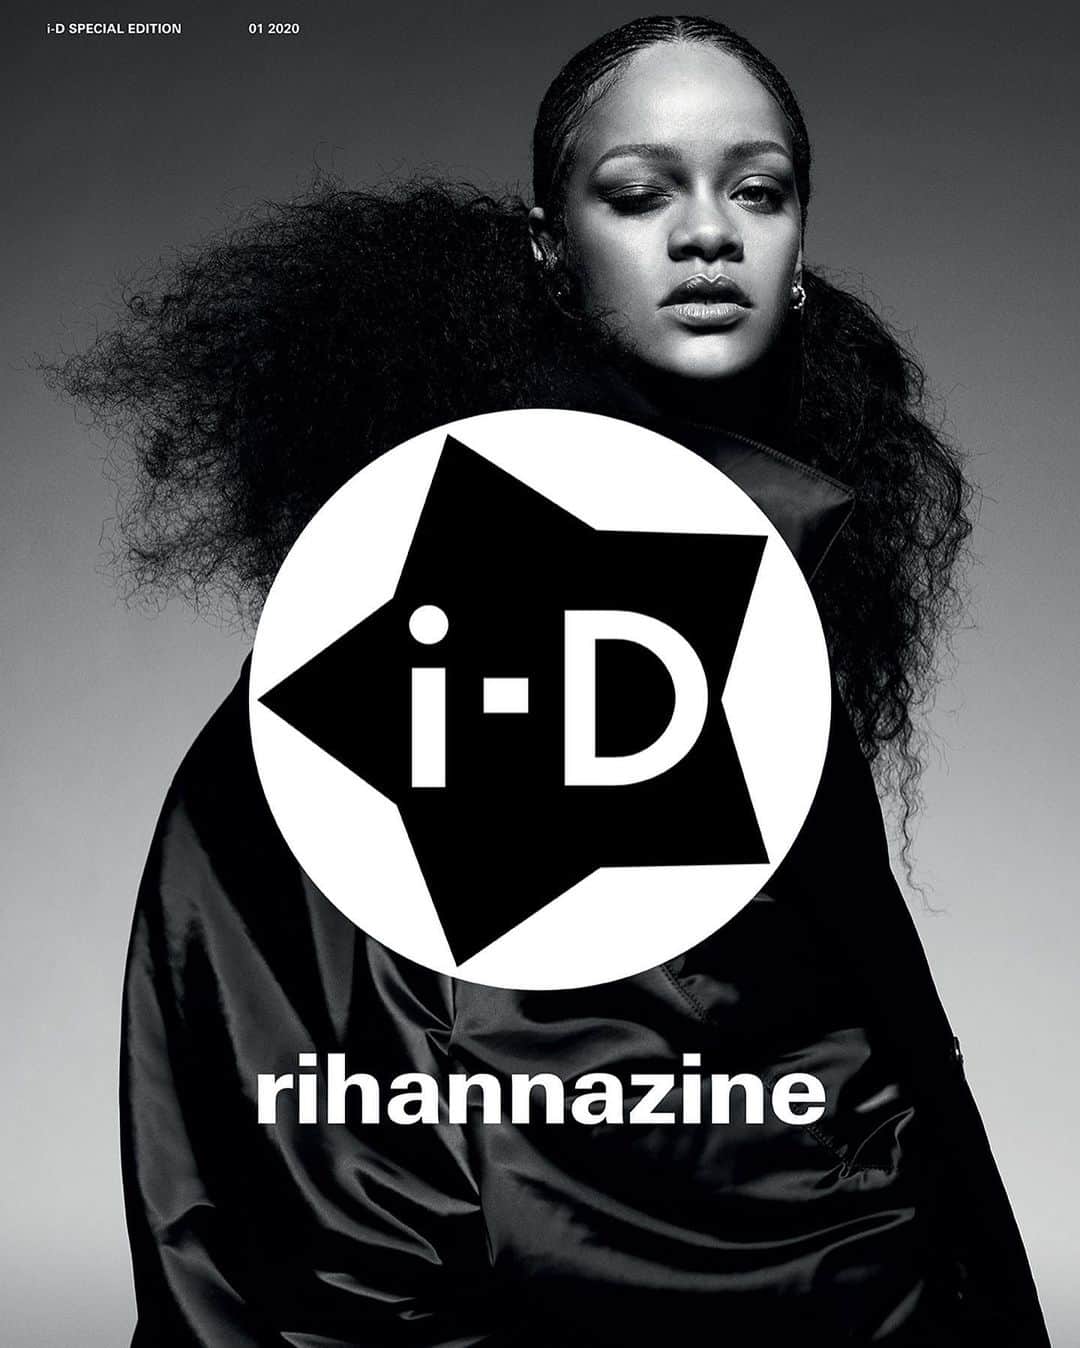 i-Dさんのインスタグラム写真 - (i-DInstagram)「It goes one by one even two by two... 😜⁣⁣ ⁣⁣ Presenting the back cover of ‘rihannazine’, a celebration of Rihanna’s ceaseless reign on the worlds of fashion, beauty and music, and i-D’s 40th anniversary, co-curated by @badgalriri herself.⁣⁣ ⁣⁣ Hit the link in bio to preorder #rihannazine exclusively at i-Dstore.co⁣⁣⁣ 🛒⁣⁣⁣⁣ ⁣⁣⁣ [i-D SPECIAL EDITION 01 2020]⁣⁣⁣⁣⁣ .⁣⁣⁣⁣⁣⁣⁣⁣ .⁣⁣⁣⁣⁣⁣⁣⁣ Photography @mario_sorrenti⁣⁣⁣⁣⁣⁣⁣⁣ Editor-In-Chief & styling @alastairmckimm⁣⁣⁣⁣⁣⁣⁣⁣ Creative Director @lauragenninger @studio191ny⁣ Casting director @samuel_ellis⁣⁣⁣⁣⁣⁣⁣ Hair creative director @yusefhairnyc⁣⁣⁣⁣⁣⁣⁣ Hair @naphiisbeautifulhair⁣⁣⁣⁣⁣⁣⁣⁣ Make-up Kanako Takase⁣⁣⁣⁣⁣⁣⁣⁣ @badgalriri wears @fenty⁣⁣⁣⁣⁣ #Rihanna #Fenty⁣⁣⁣ ⁣」1月21日 1時34分 - i_d